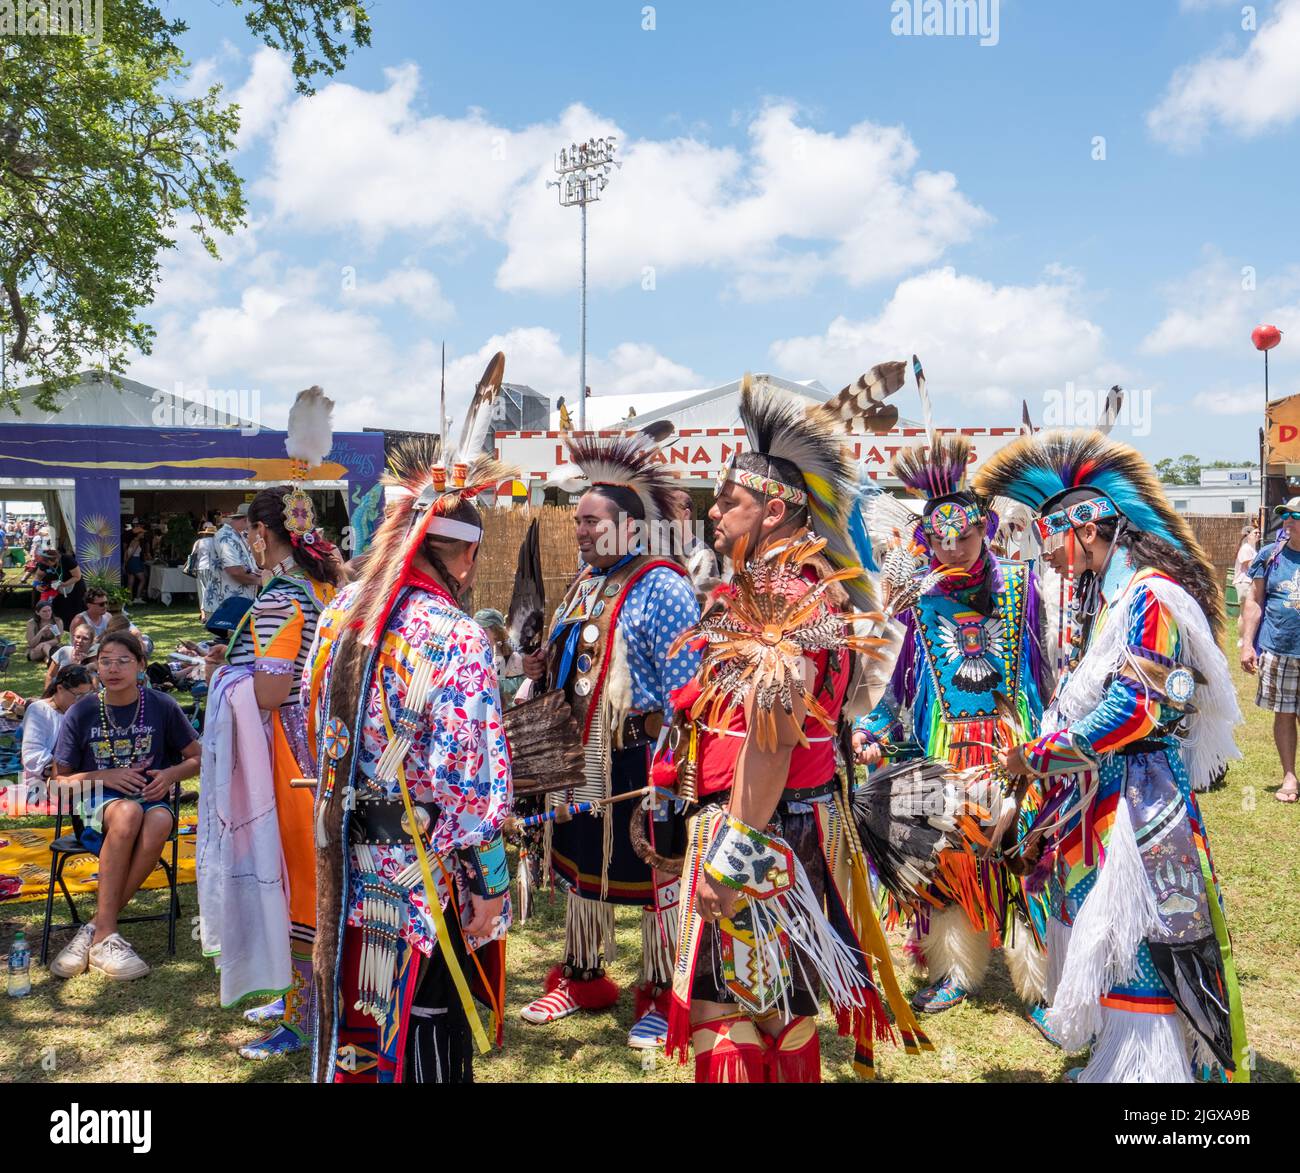 NEW ORLEANS, LA, USA - MAY 1, 2022: Native Americans in traditional dress perform at the 2022 New Orleans Jazz and Heritage Festival Stock Photo